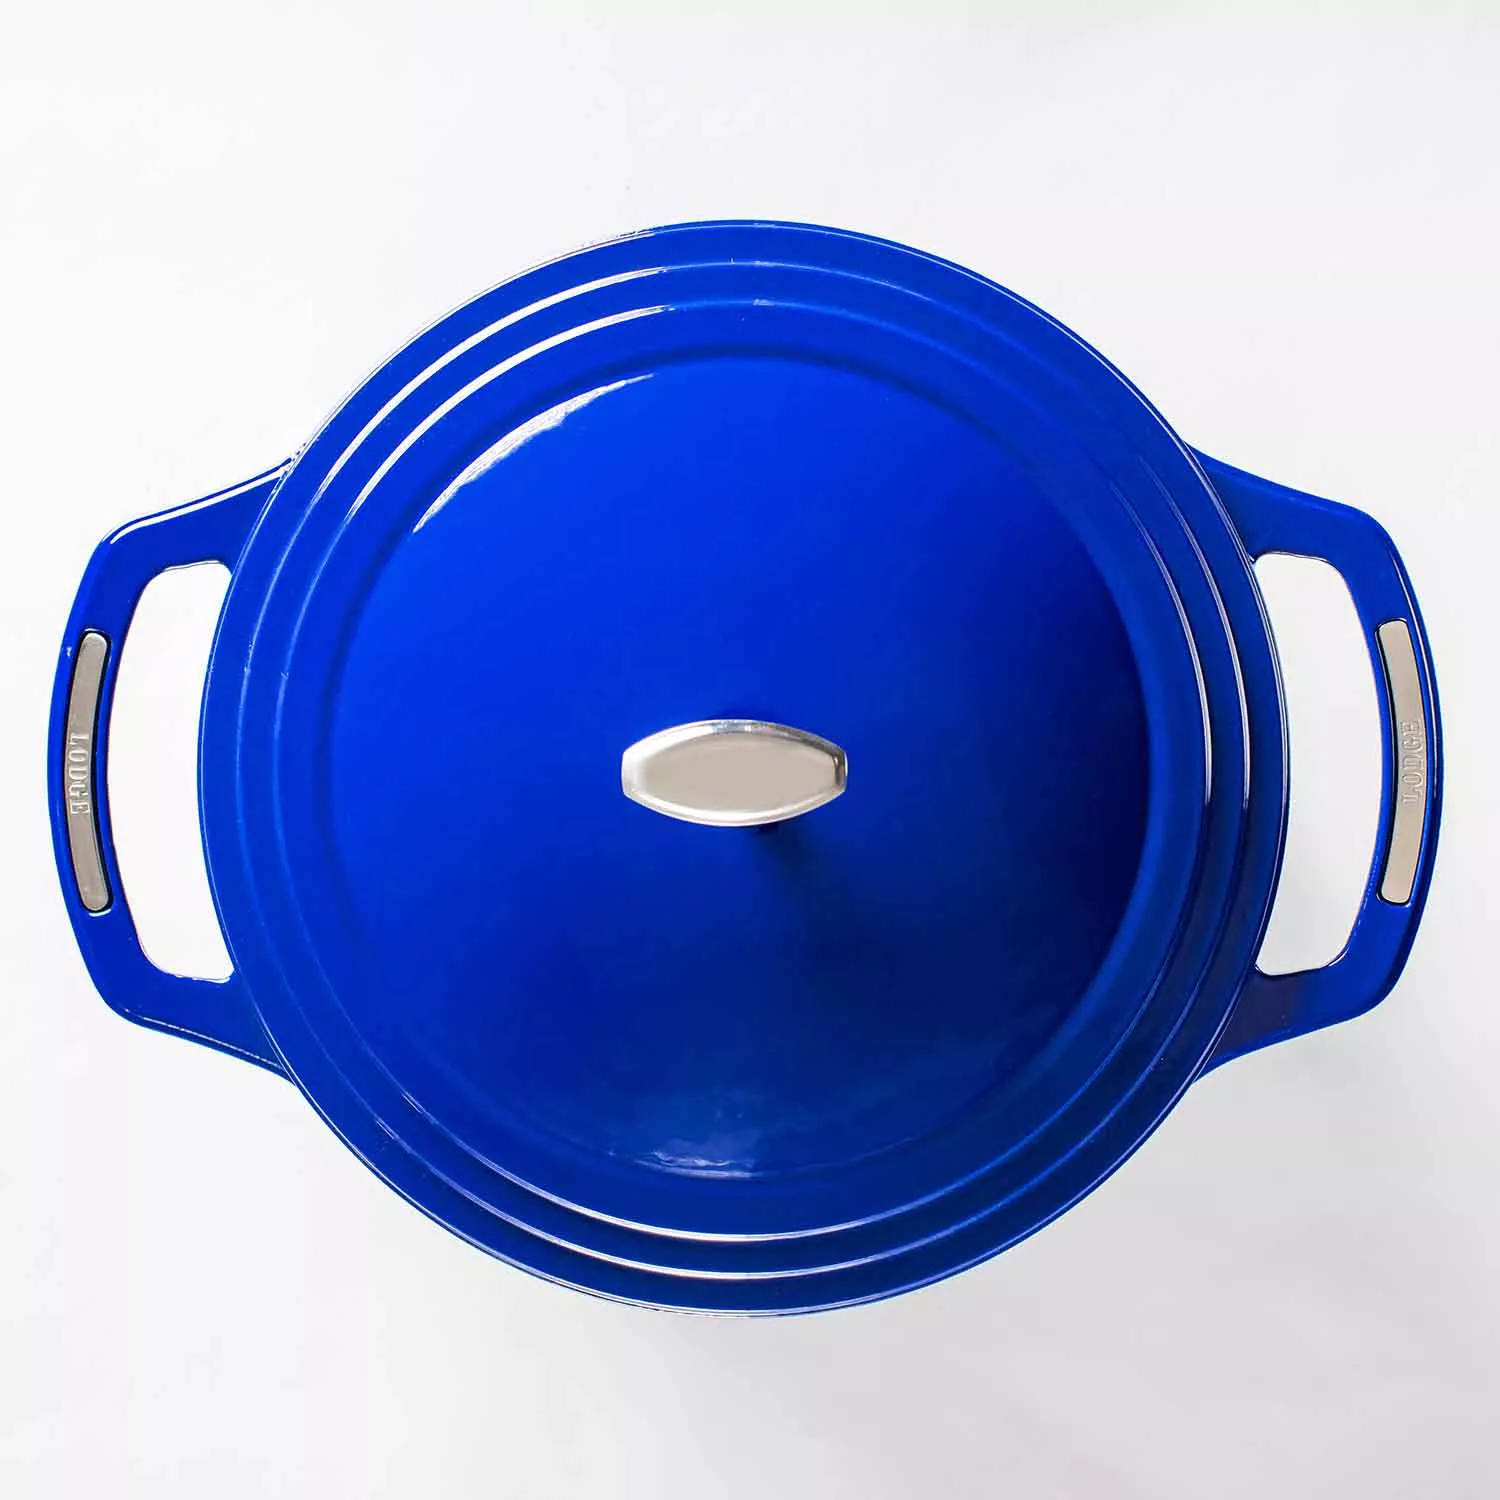 Sur La Table Enameled Cast Iron Round Wide Covered Dutch Oven, 7